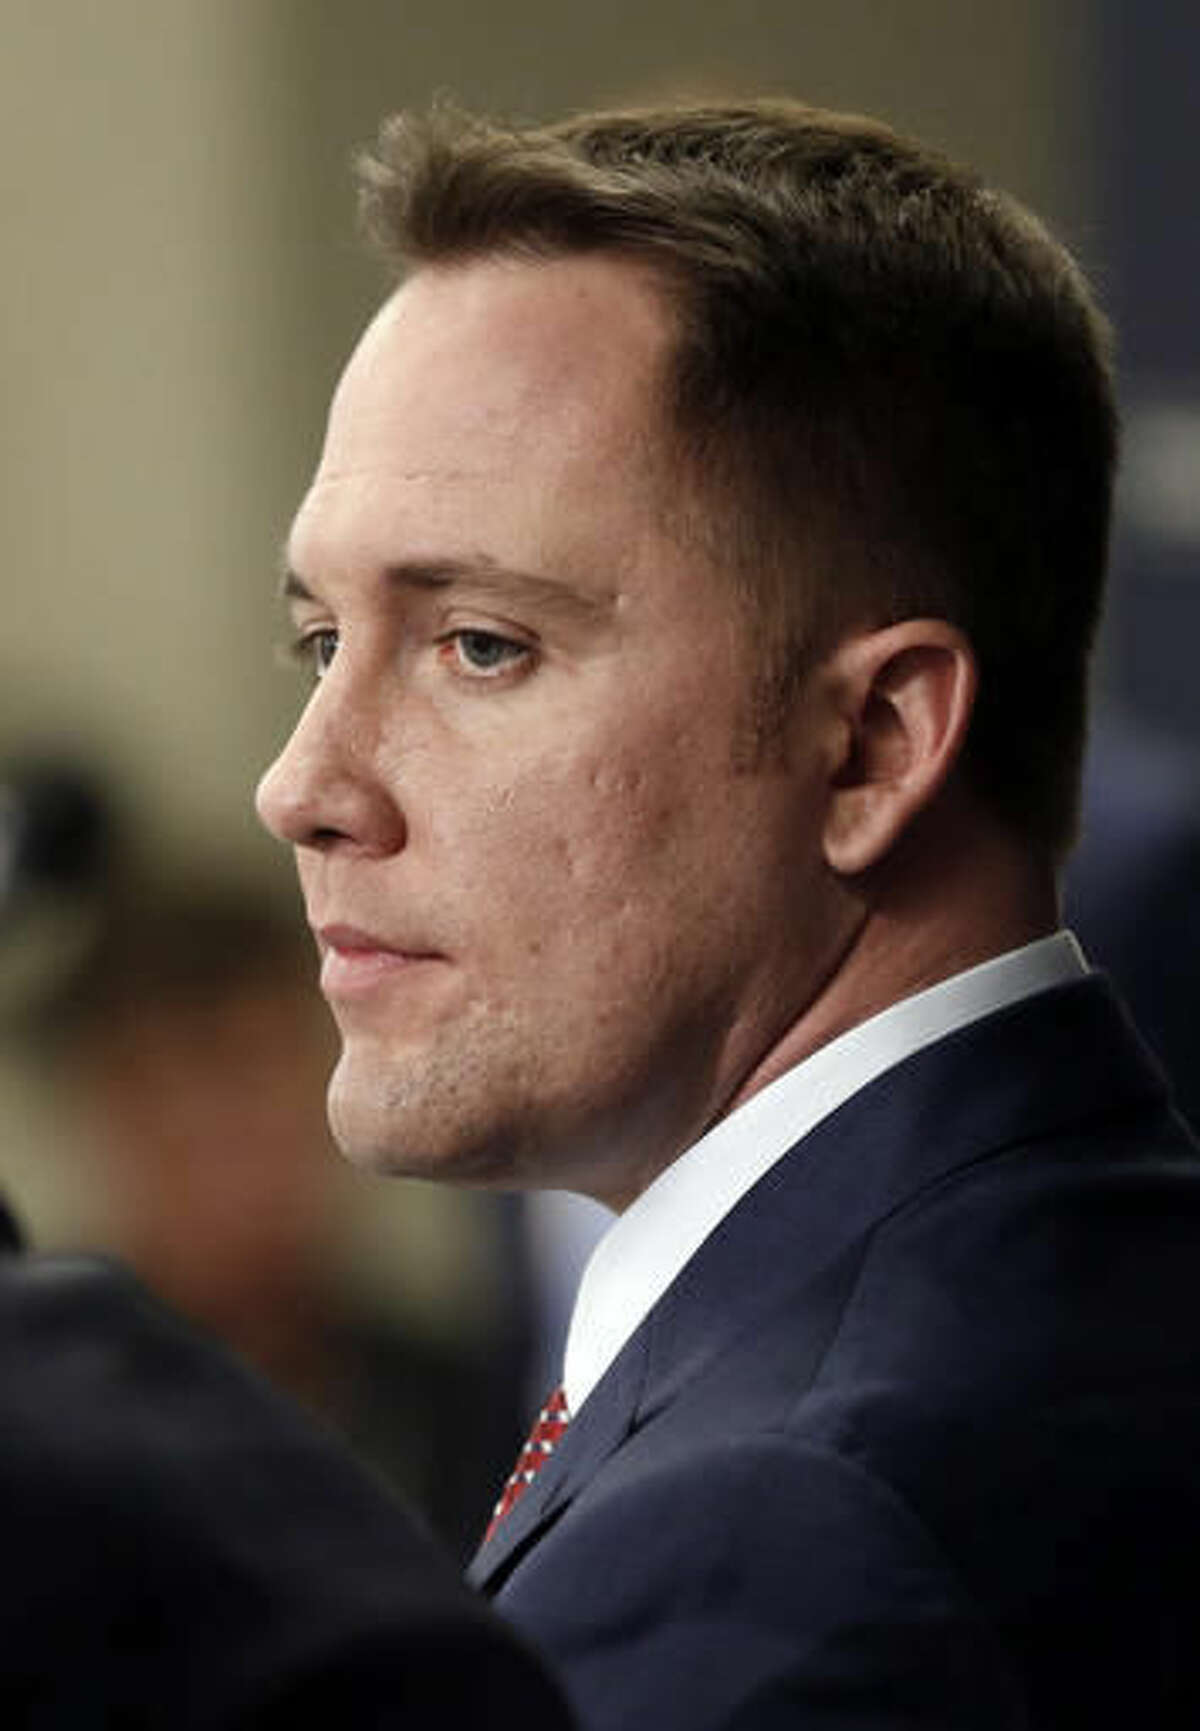 NCORRECTS TAD TO THAD - New Minnesota Twins chief baseball officer Derek Falvey listens during an introductory press conference Monday, Nov. 7, 2016 in Minneapolis. The major league baseball team is looking to Falvey and new general manager Thad Levine with hopes they will lead them out of the abyss after they finished the season in last place. (AP Photo/Jim Mone)